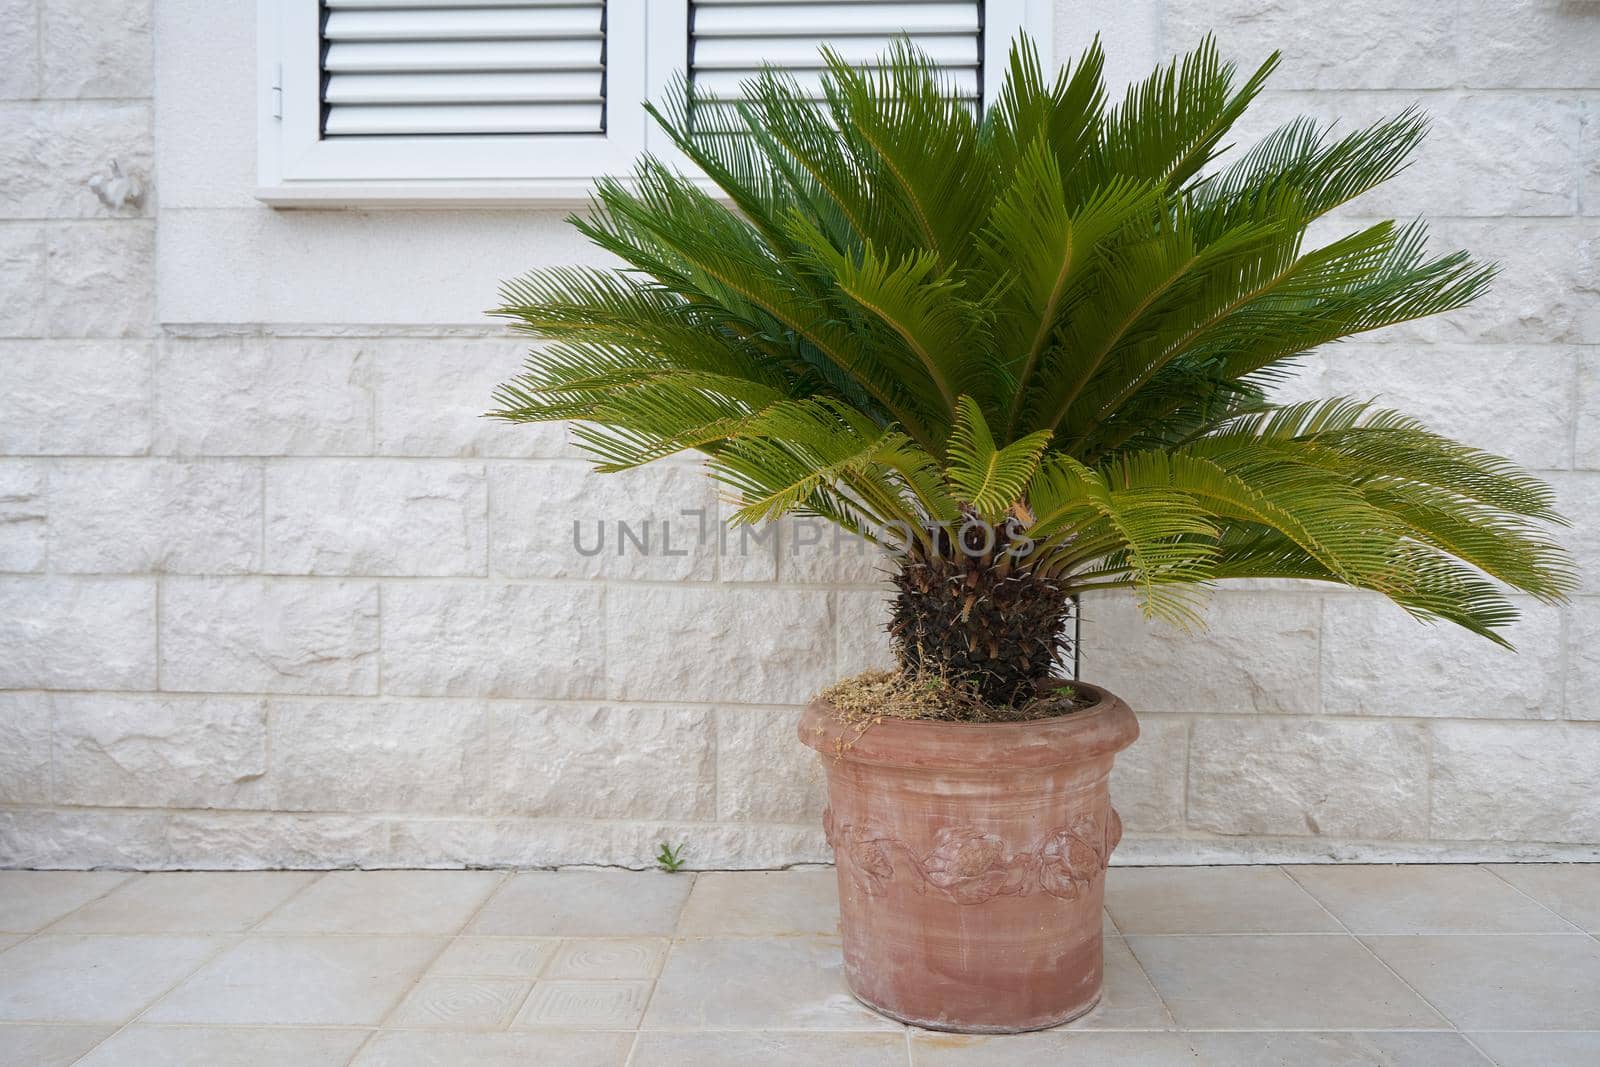 Cycas palm tree in large pots outside the building. by iceberg